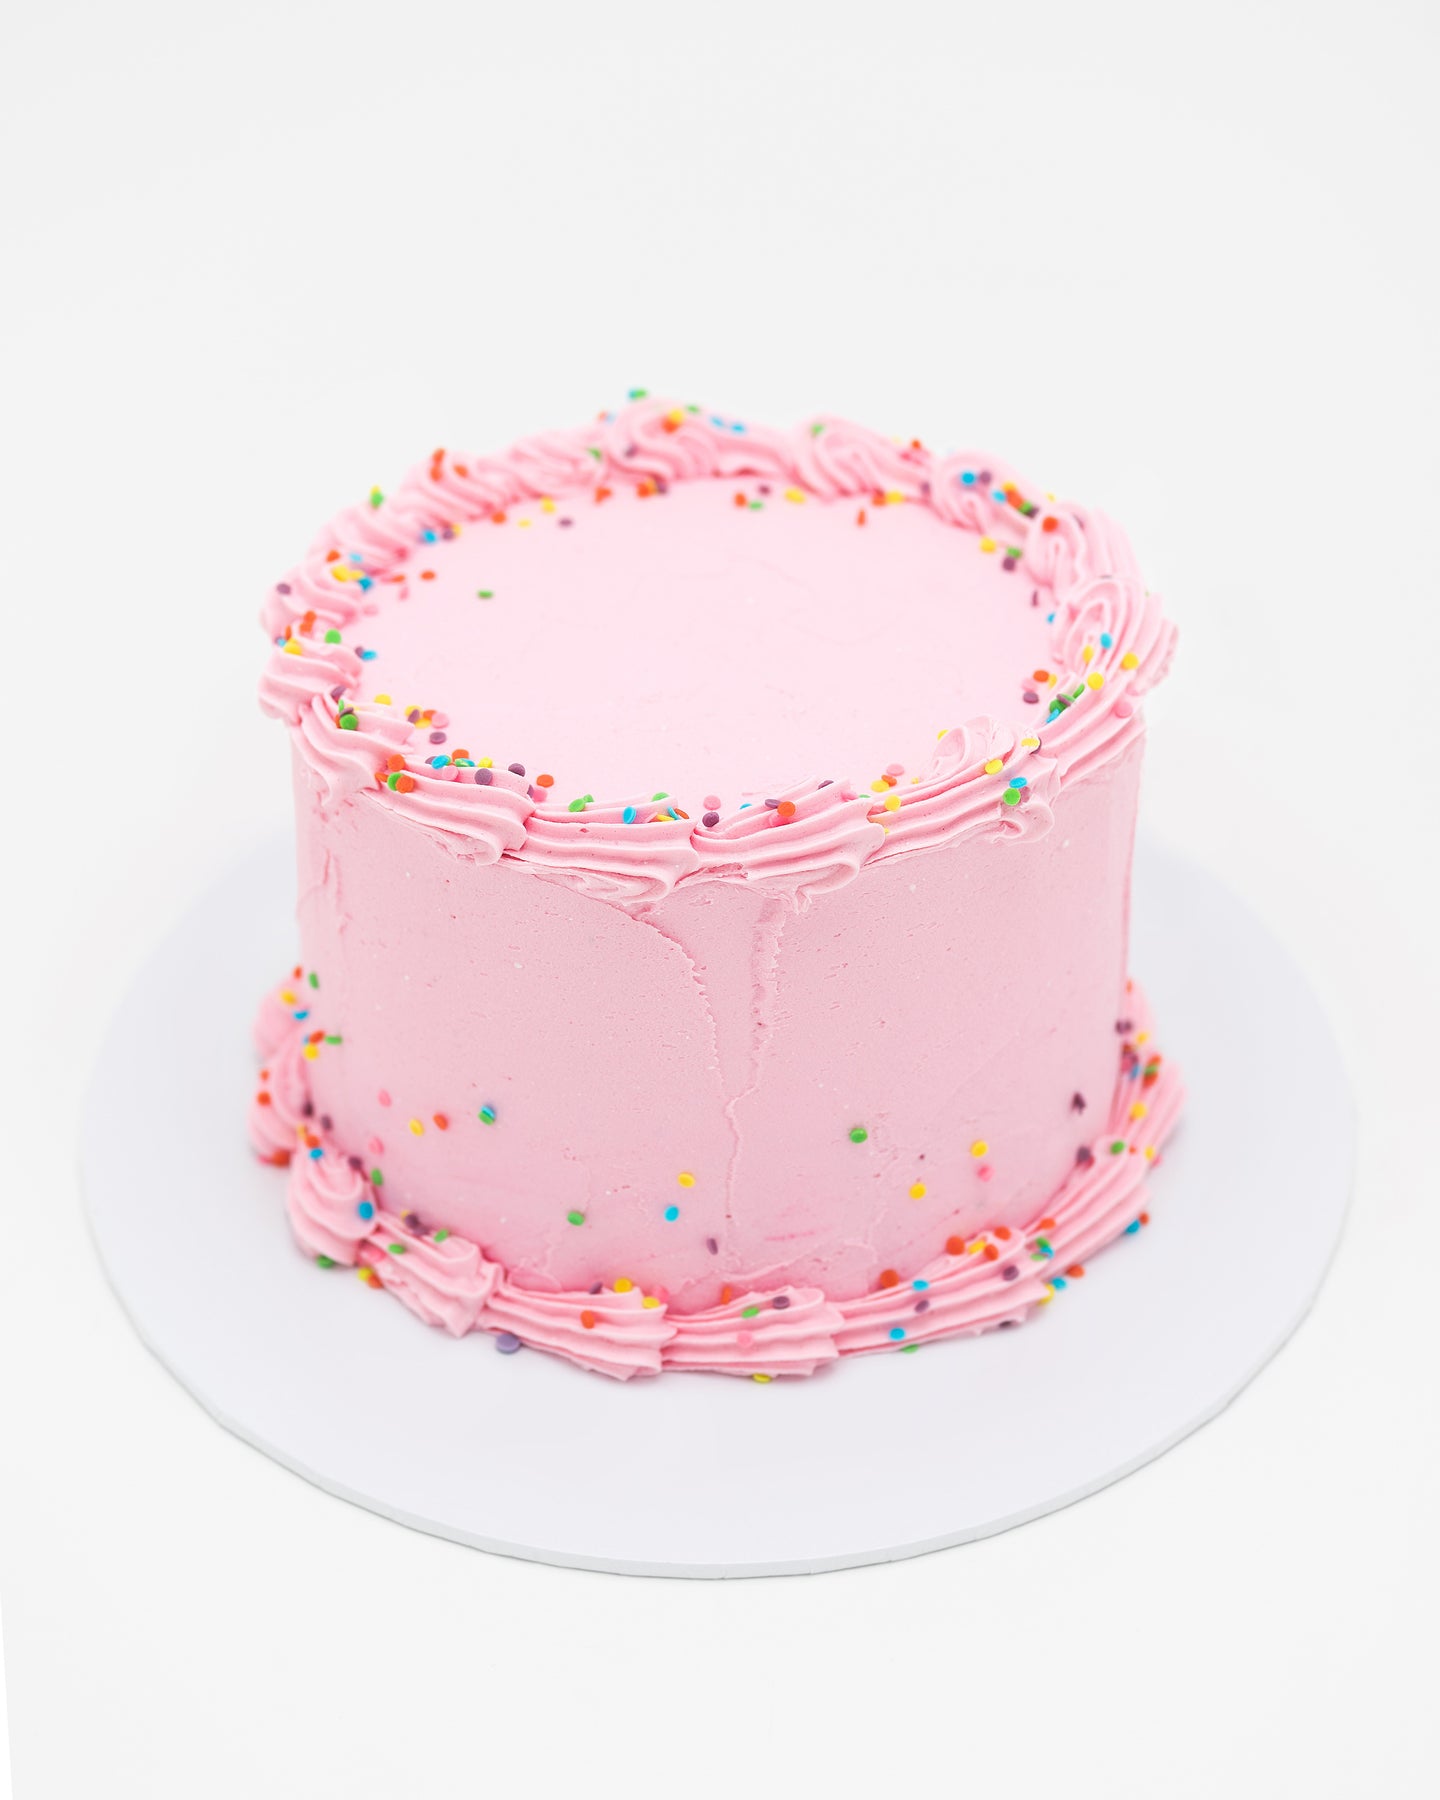 Who is best for online cake delivery in Mumbai? - Quora